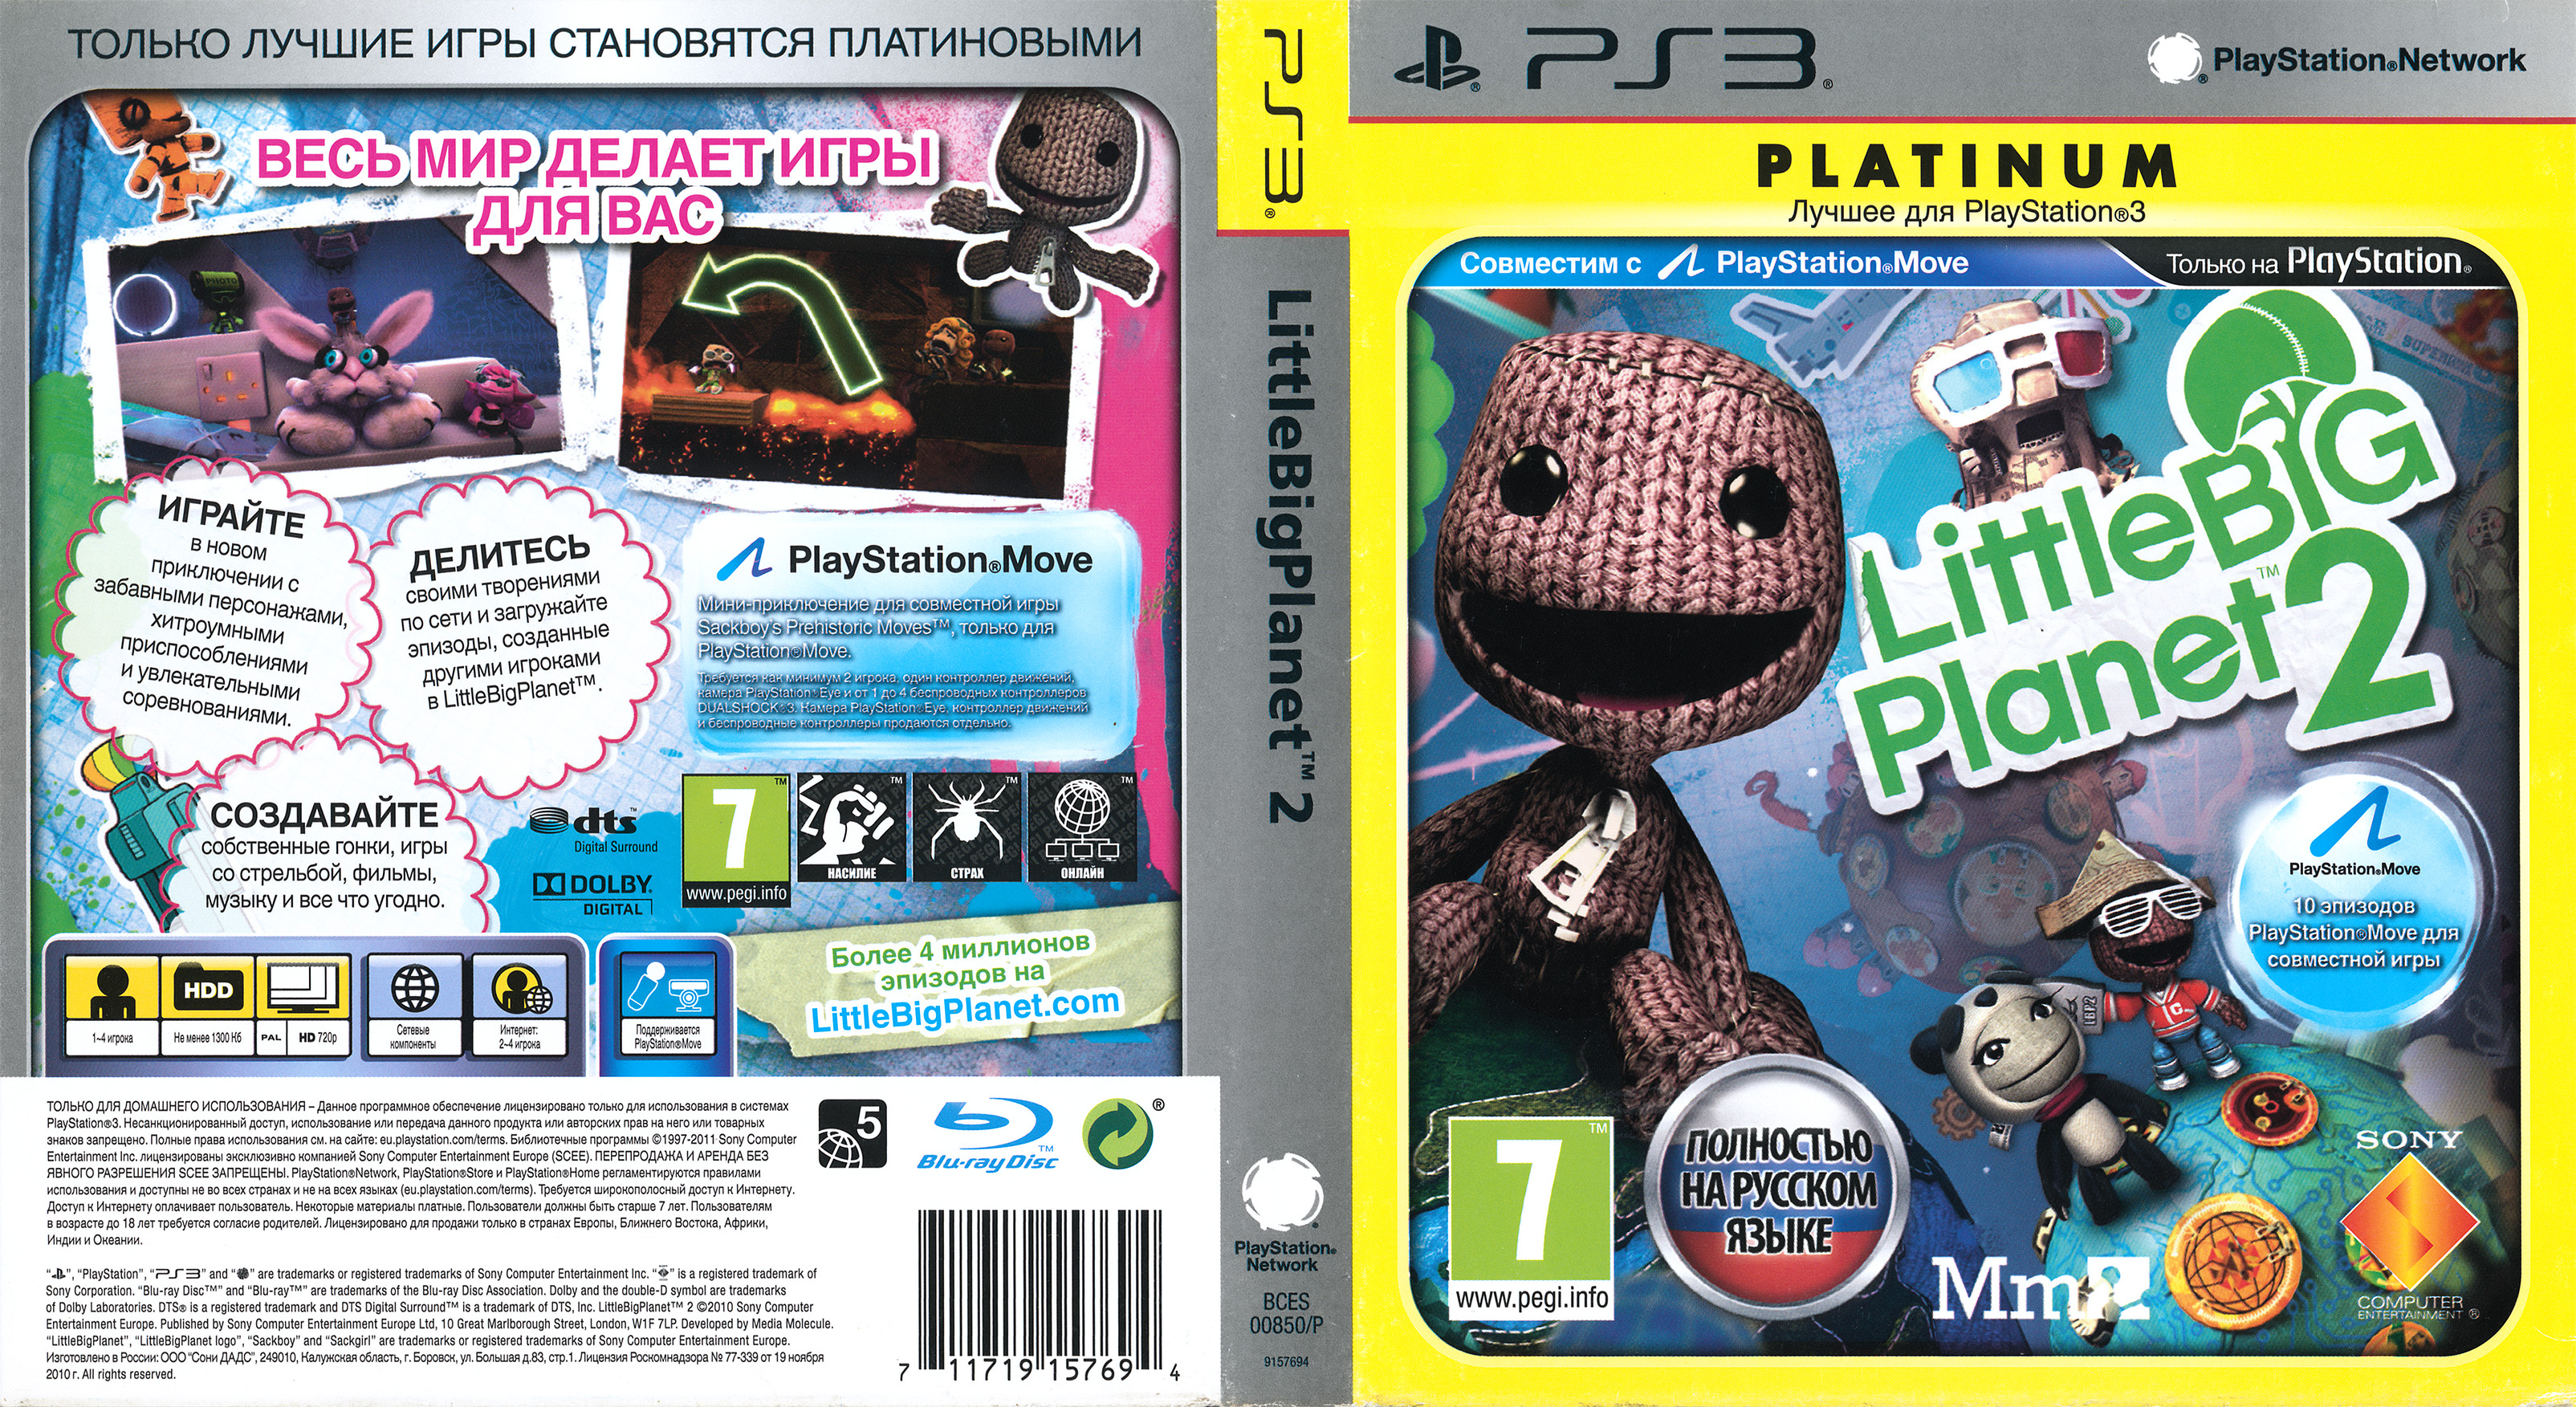 bewaker Derbevilletest Het pad LittleBigPlanet 2 (Platinum: The Best of PlayStation 3) PS3  BCES-00850/P/RUS Russia — Complete Art Scans : Free Download, Borrow, and  Streaming : Internet Archive